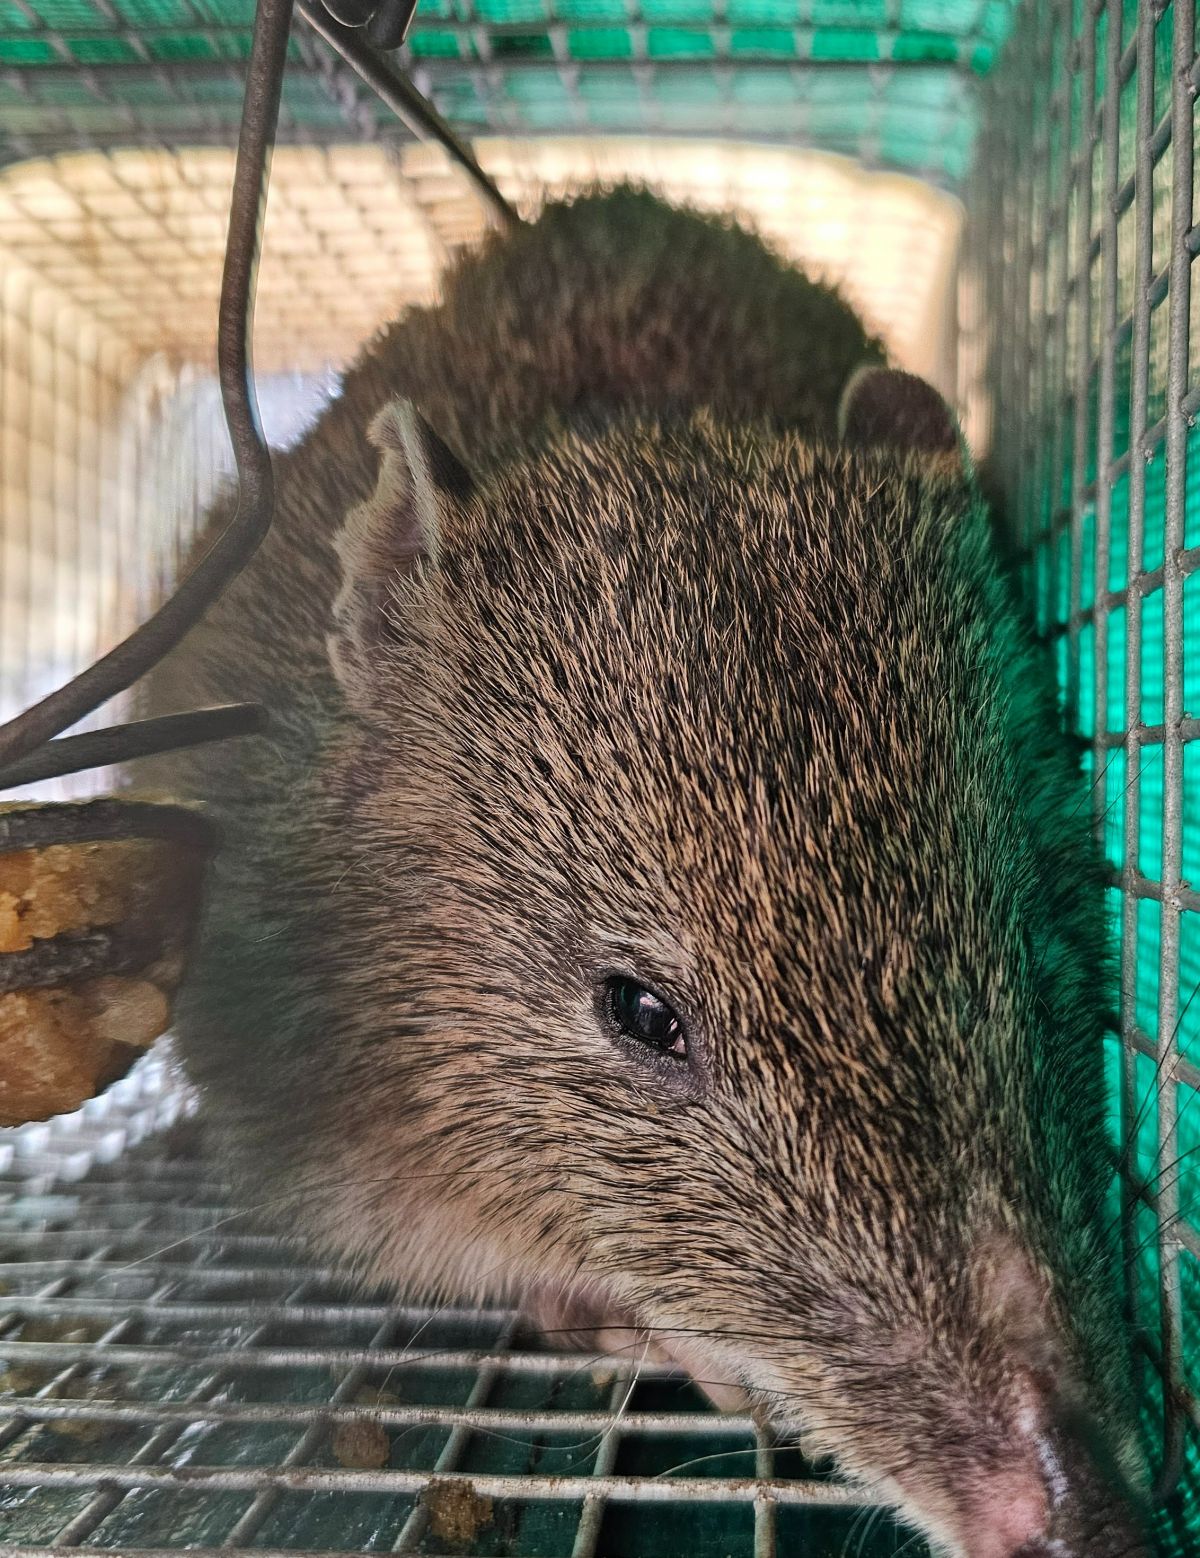 An image of a Southern Brown Bandicoot found in a cage trap during mammal monitoring.